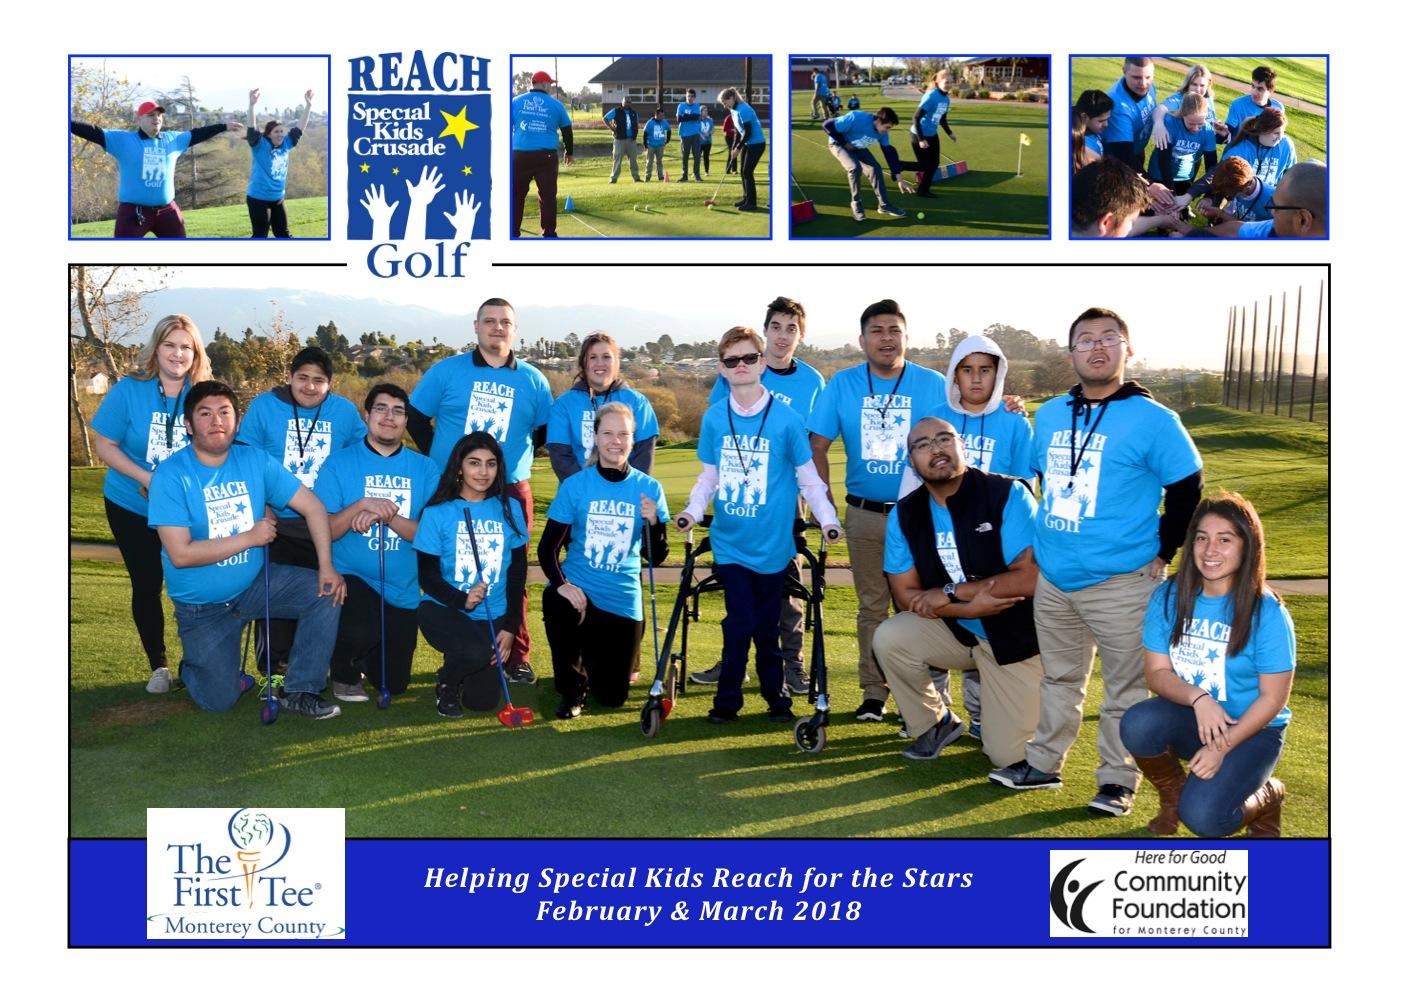 REACH Golf - Wednesdays in Salinas, Fall 2018 (Ages 7-22)